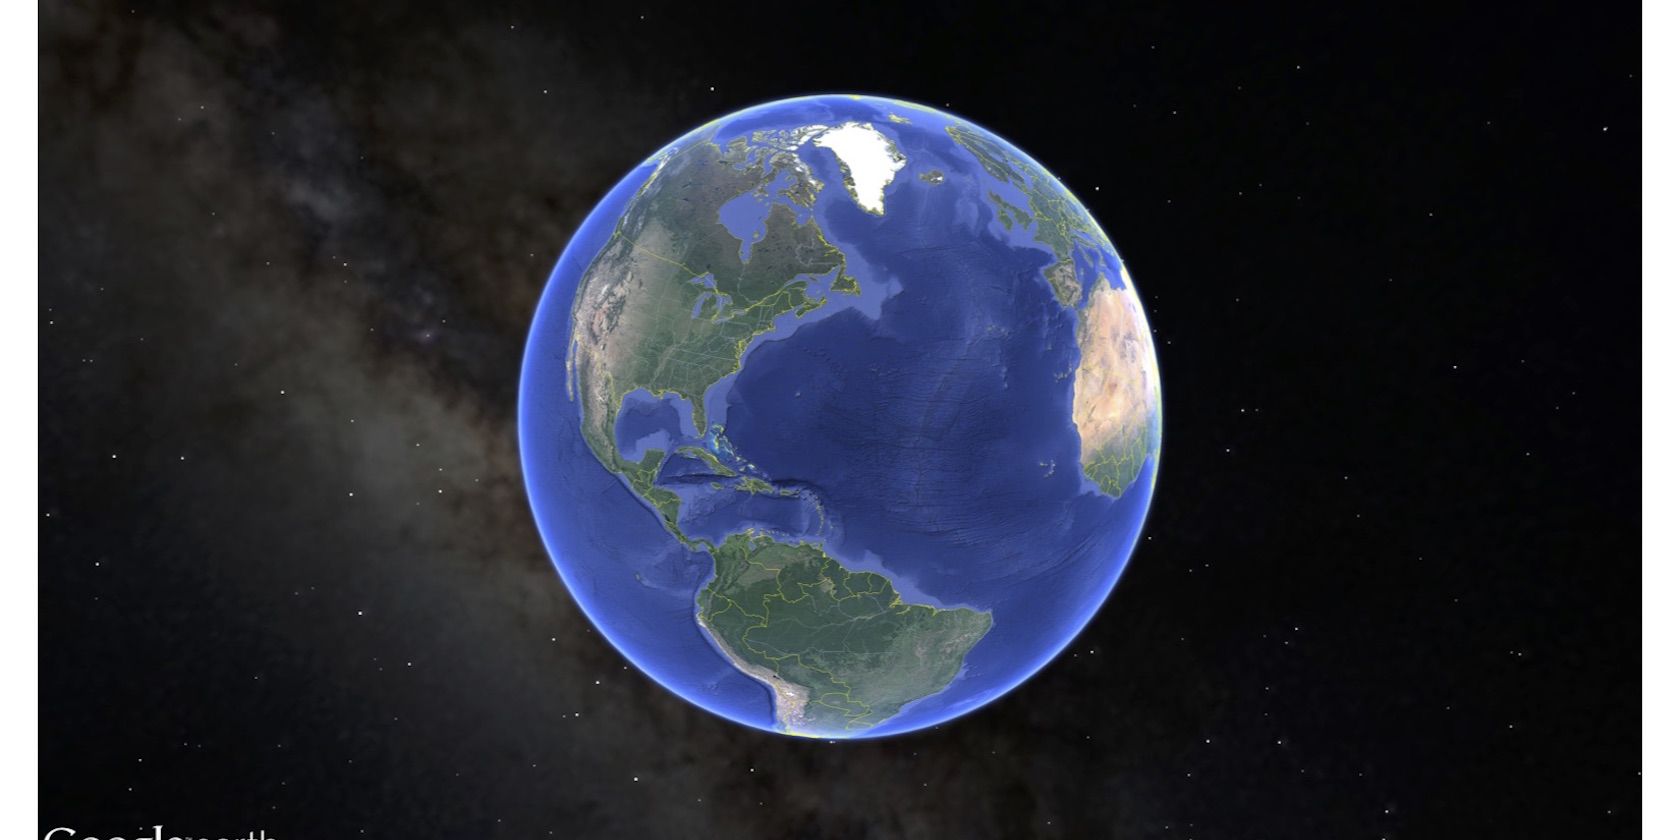 google earth download for windows 11